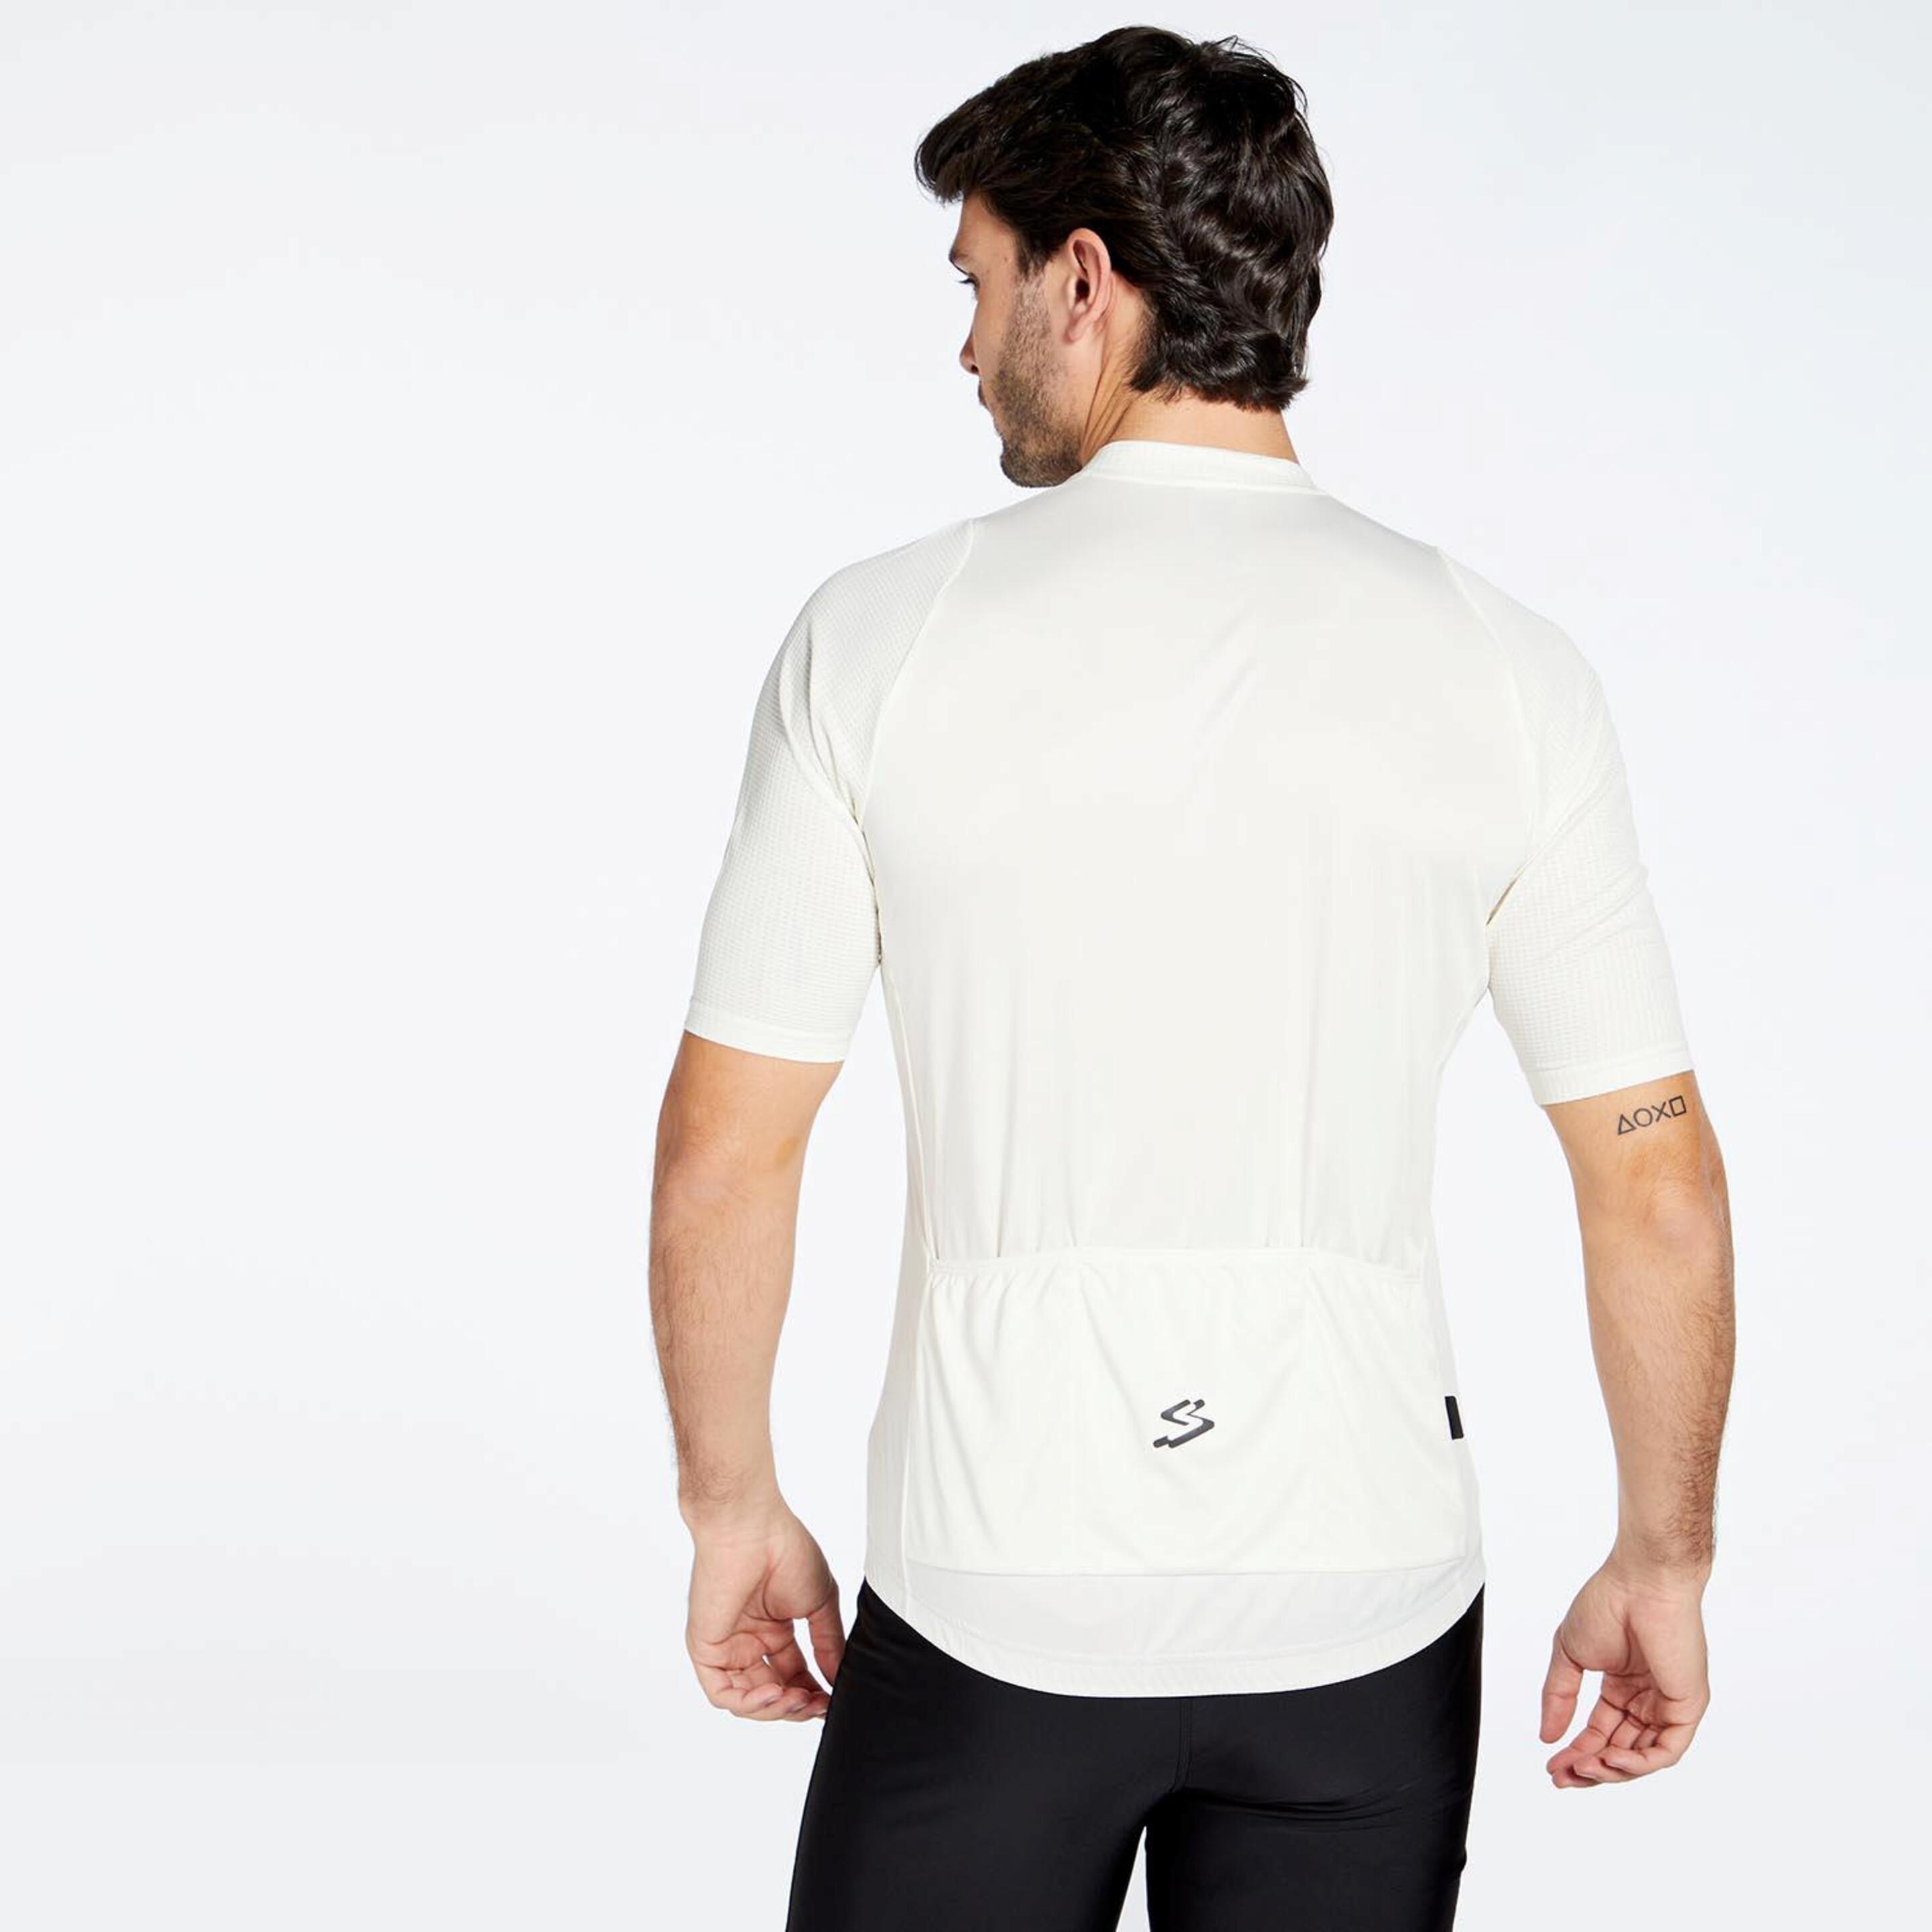 Spiuk Anatomic - Blanco - Maillot Ciclismo Hombre